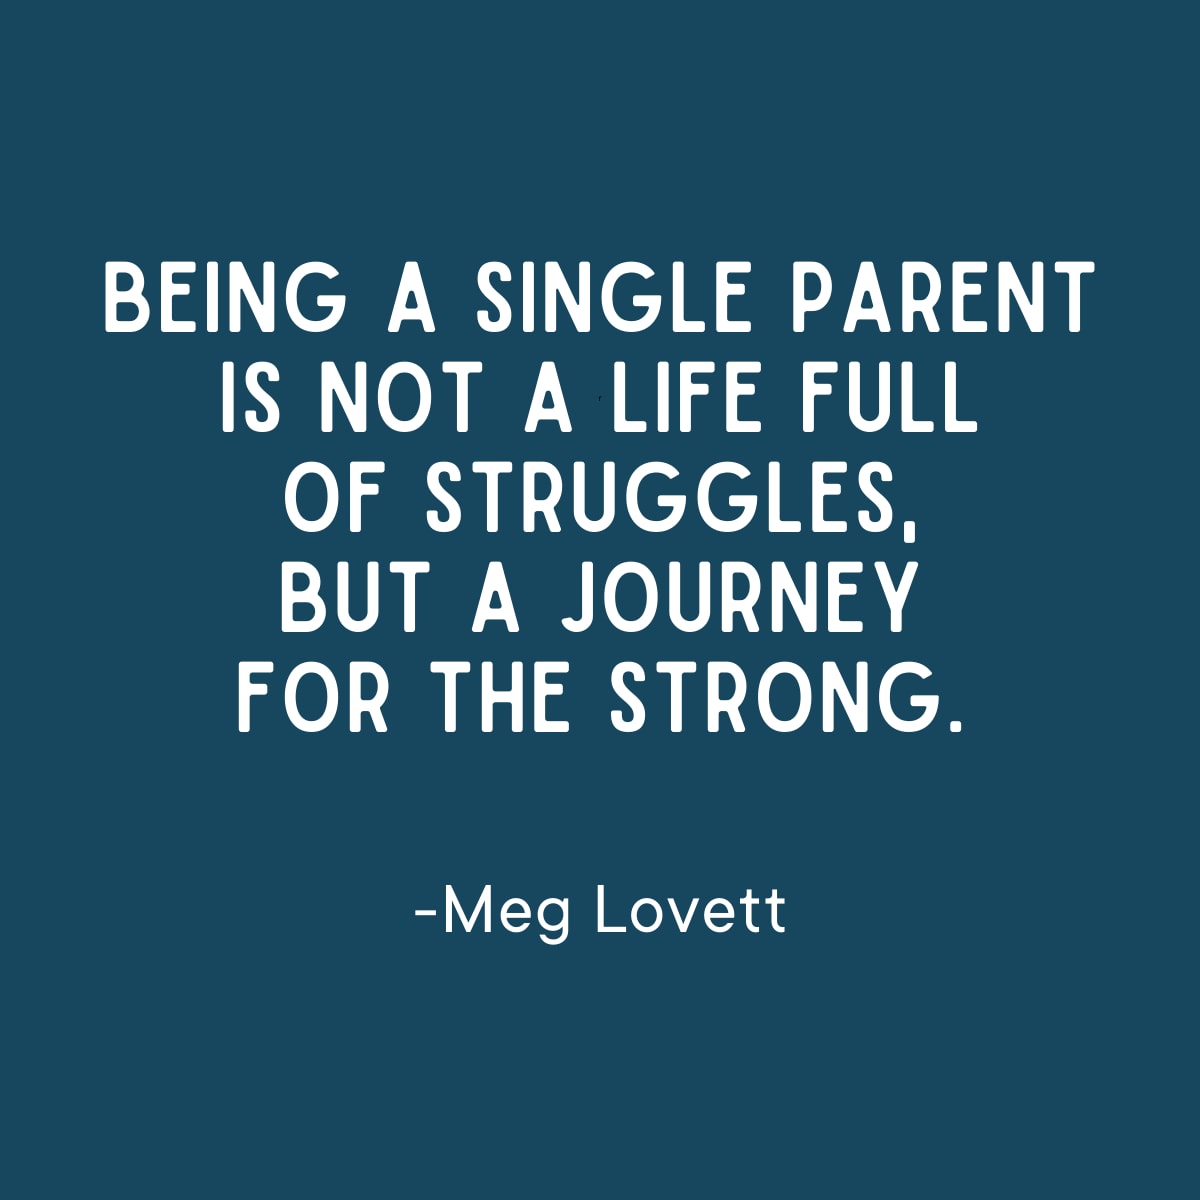 single mom quotes to son